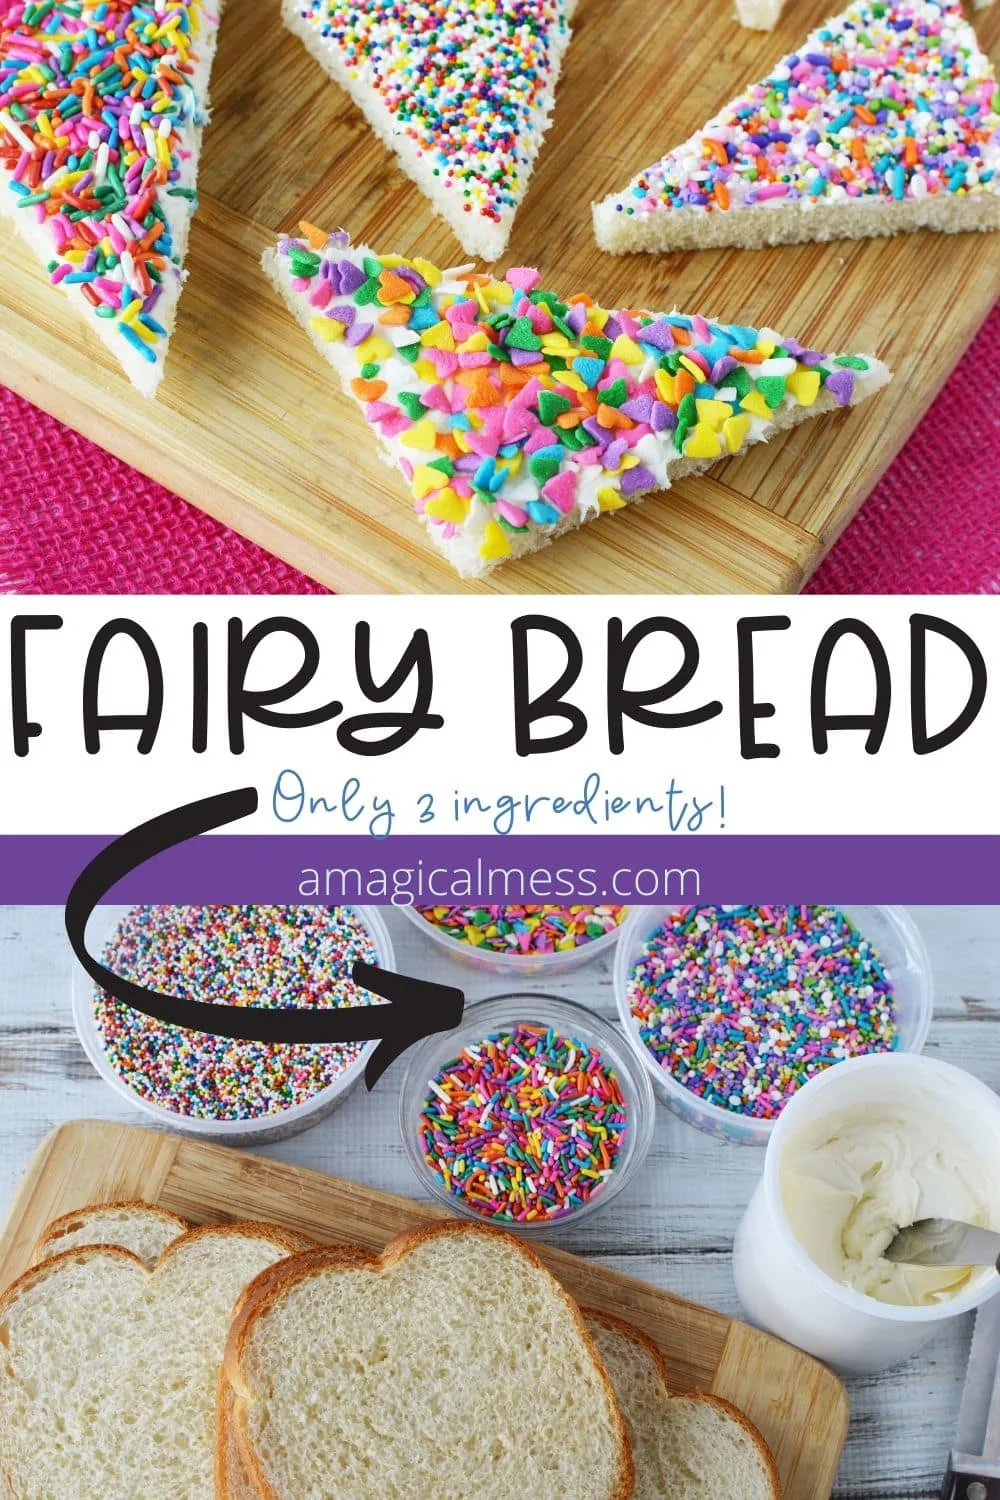 Fairy bread with sprinkles